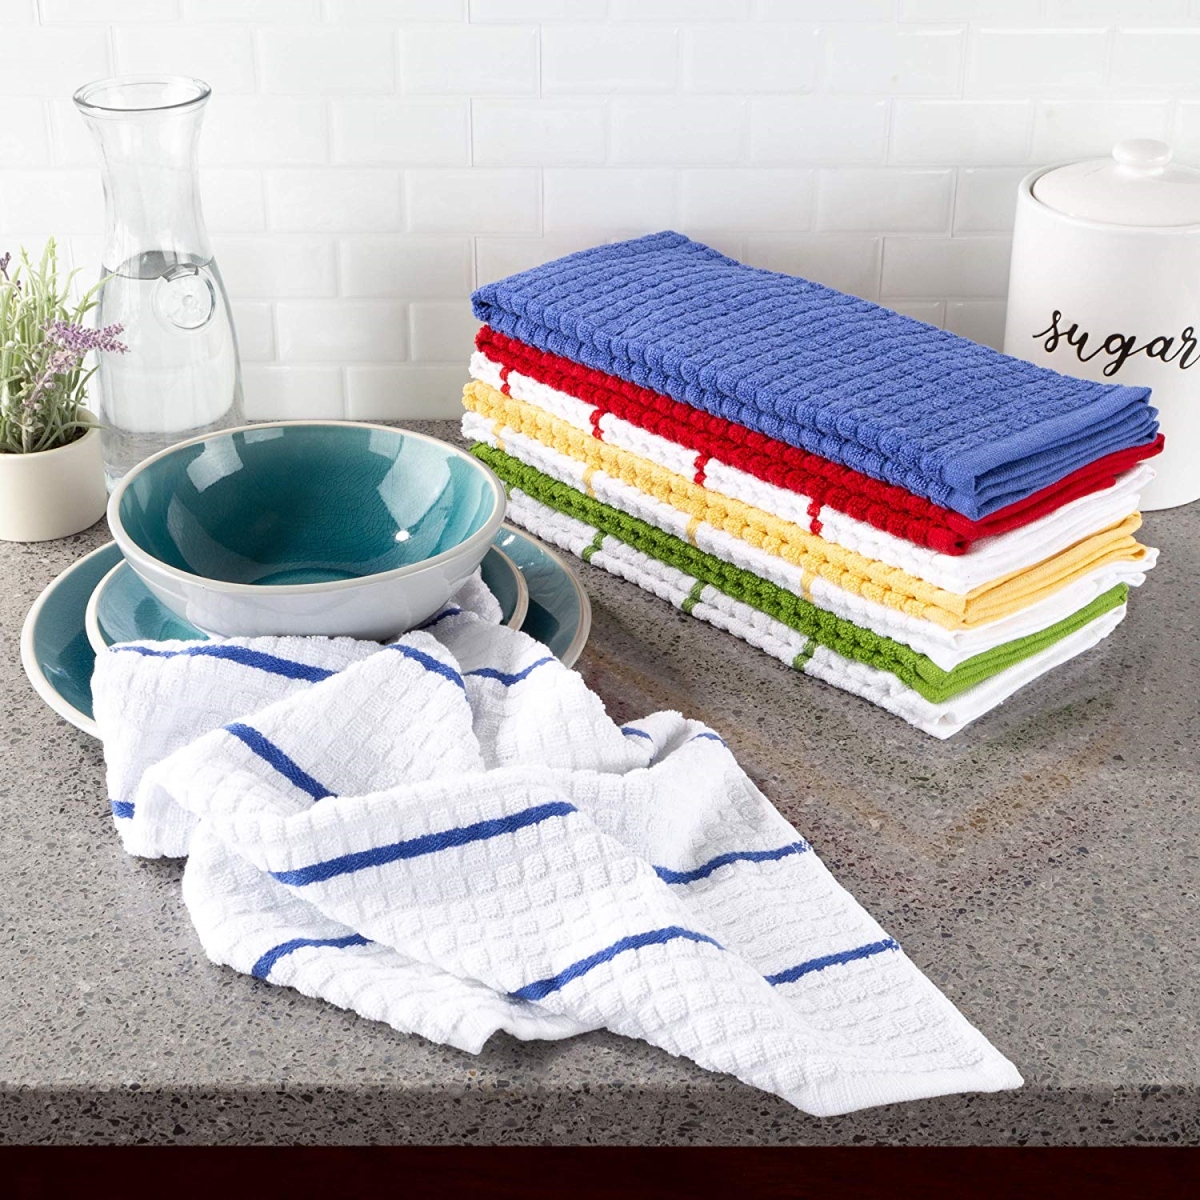 69a-39352 16 X 28 In. Home Kitchen Towels, Multi-color - Set Of 8